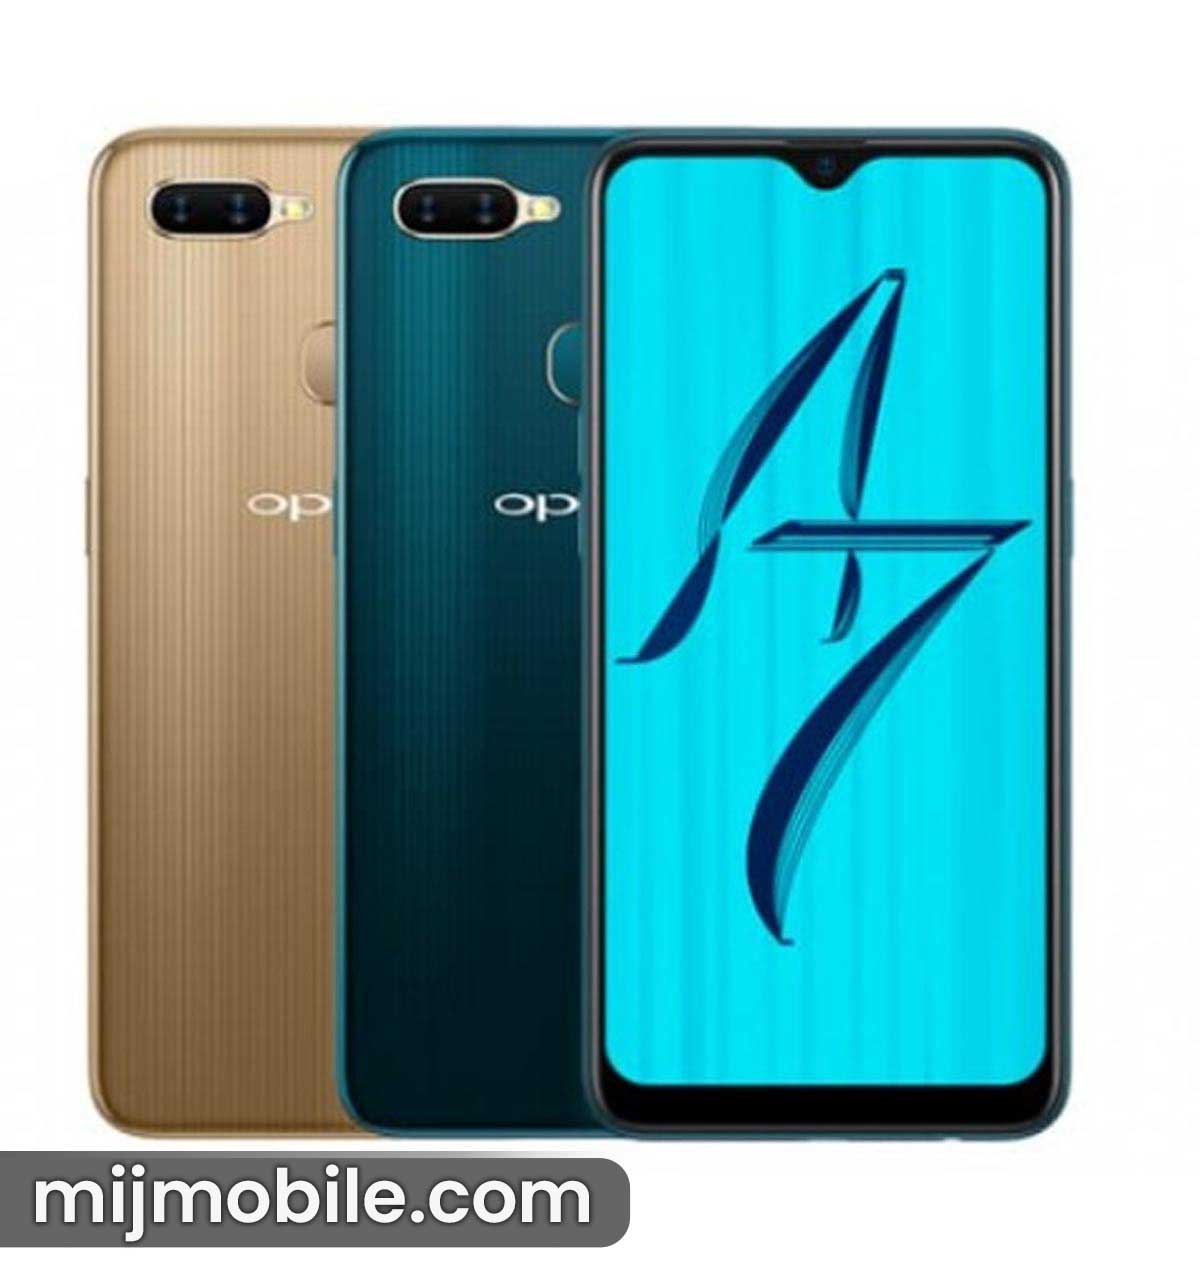 Oppo A7n Price in Pakistan & Specifications Oppo A7n Price in Pakistan is only 31,999.